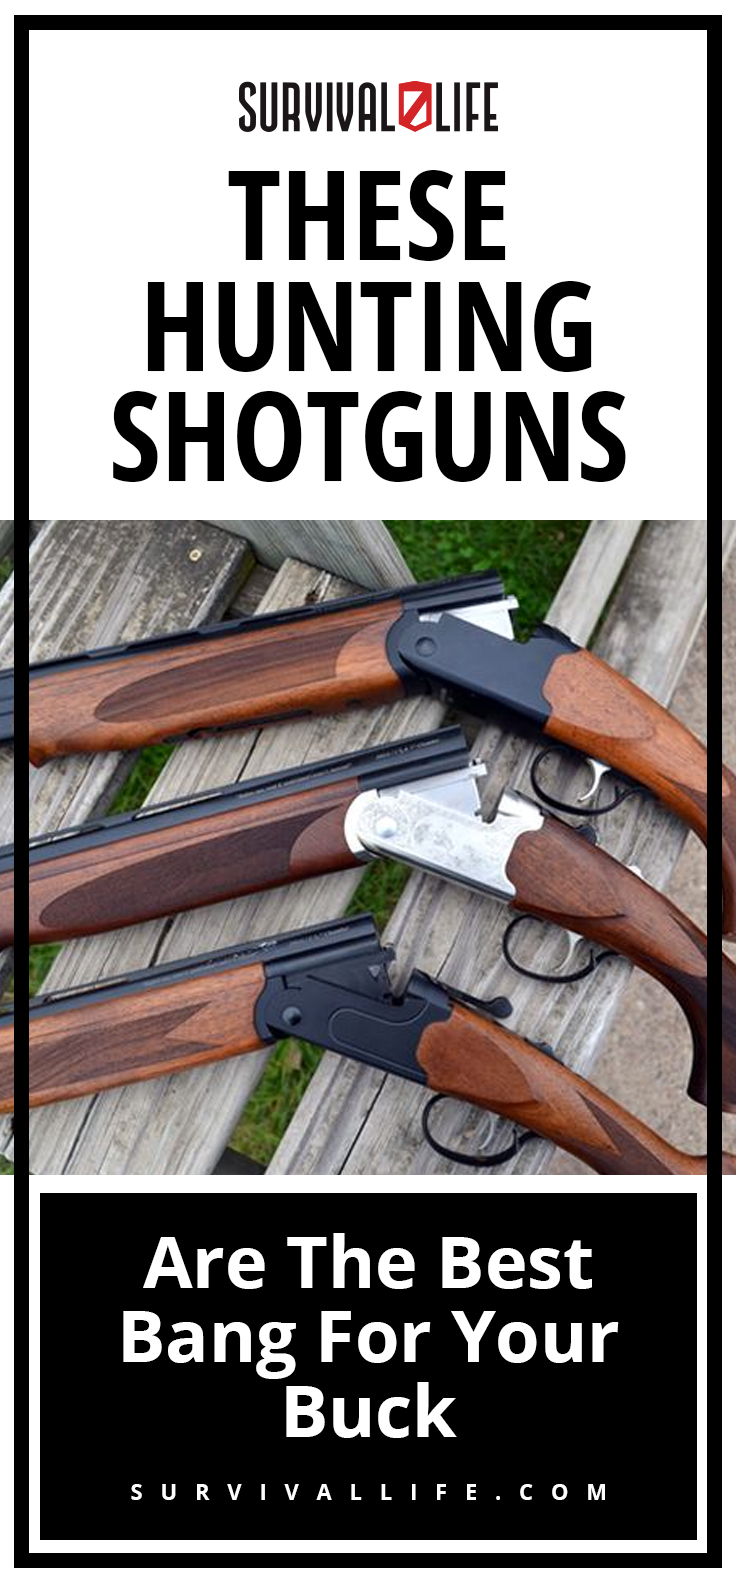  These Hunting Shotguns Are The Best Bang For Your Buck|https://survivallife.com/hunting-shotguns/